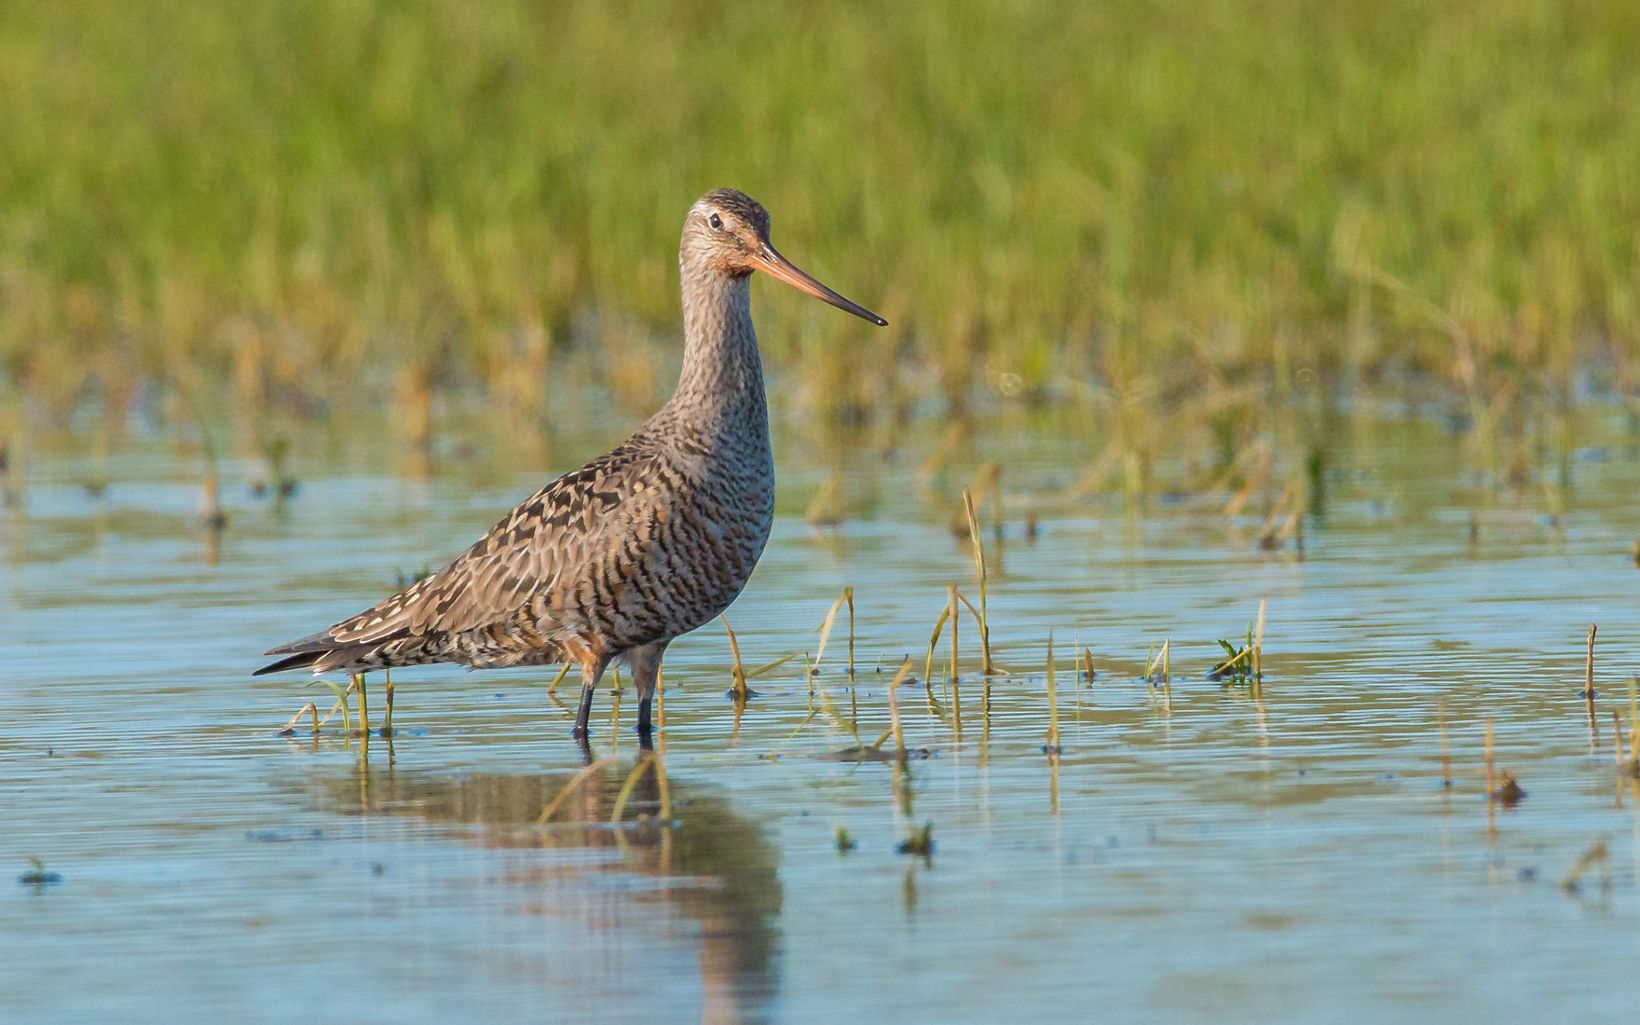 Hudsonian Godwit The long, flexible bill of the Hudsonian godwit helps it grab snails, worms and other prey hiding deep in thick mud. © Joshua Smith